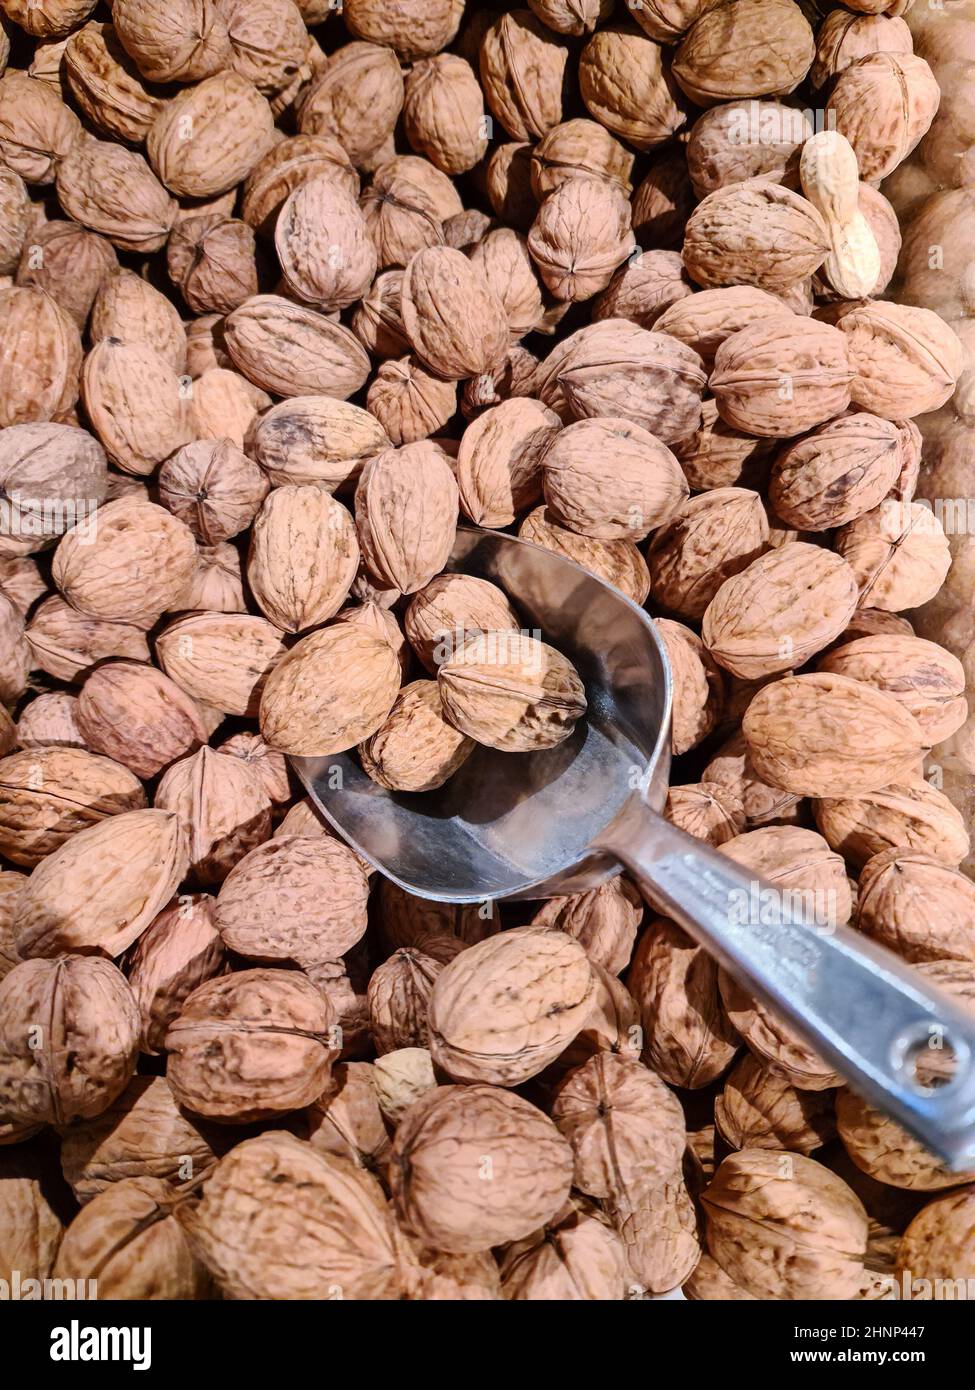 Many walnuts with a small scoop to fill in a sales display. Top view.. Stock Photo